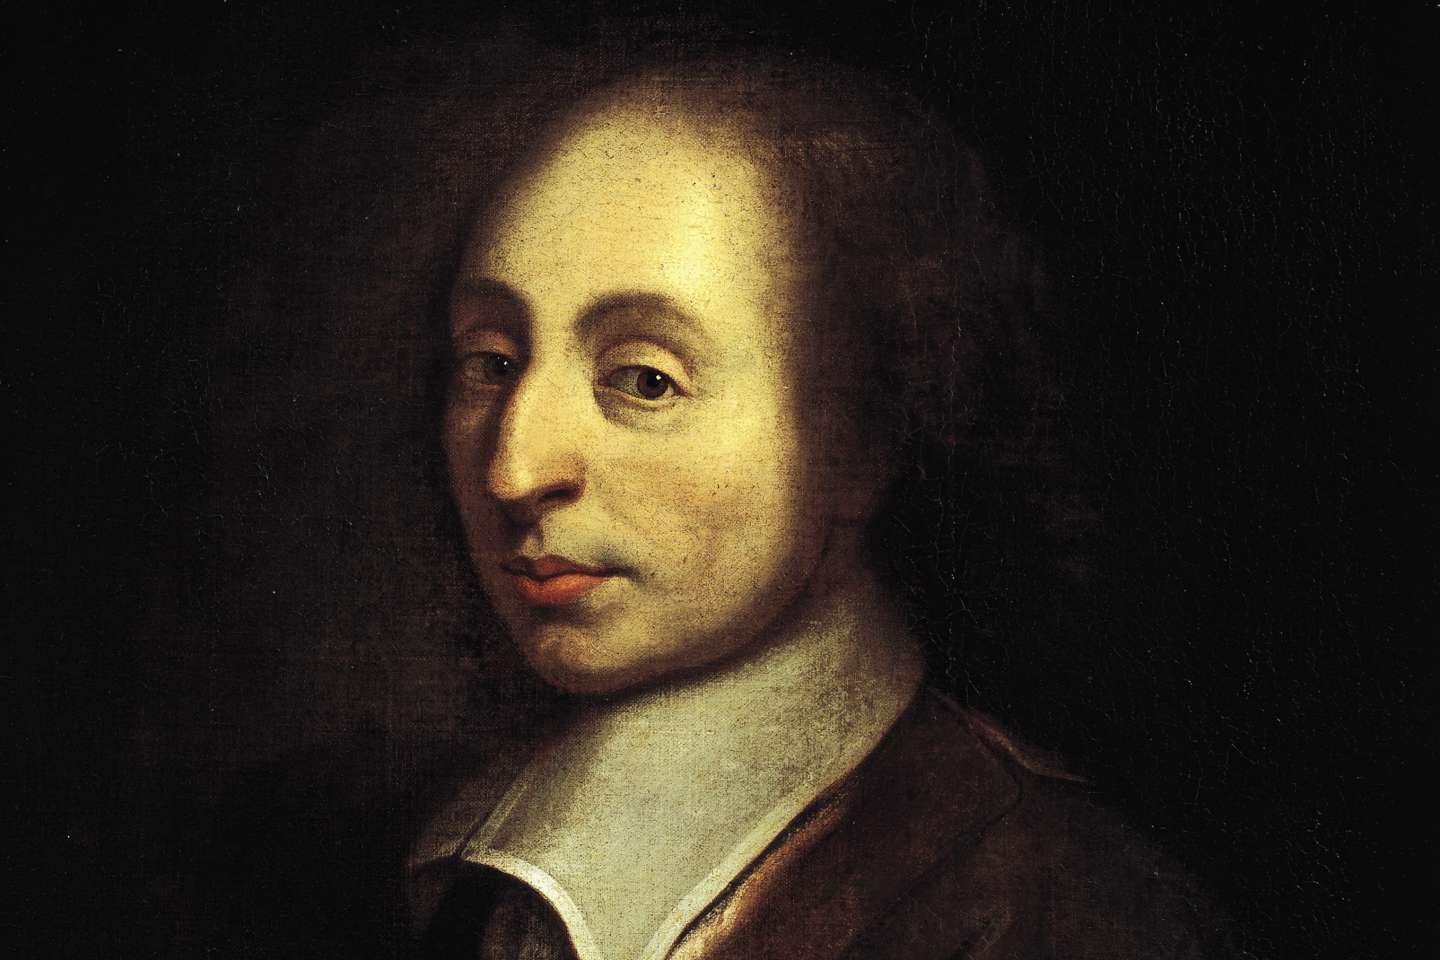 Why Blaise Pascal was “one of our deepest thinkers”